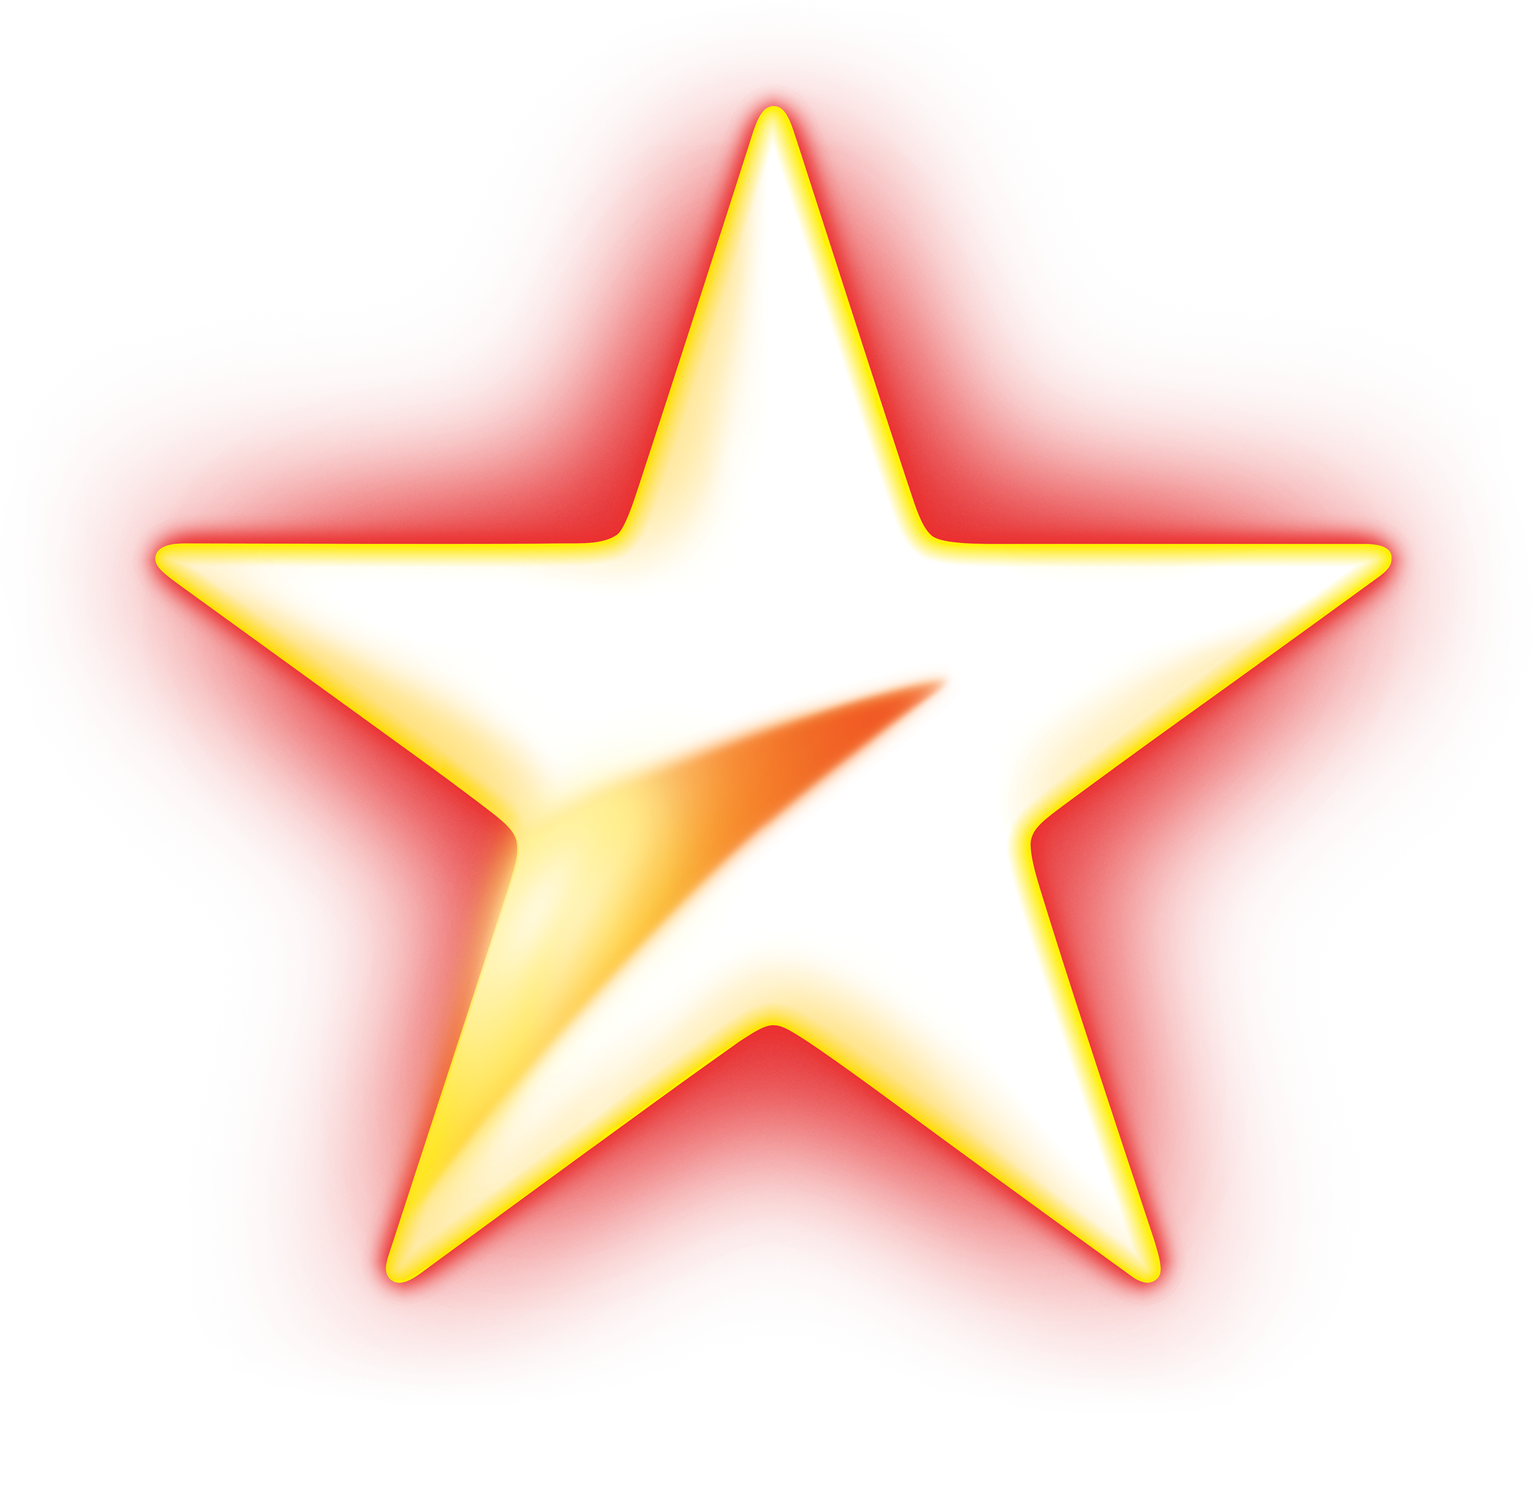 3D Gold Star PNG HD